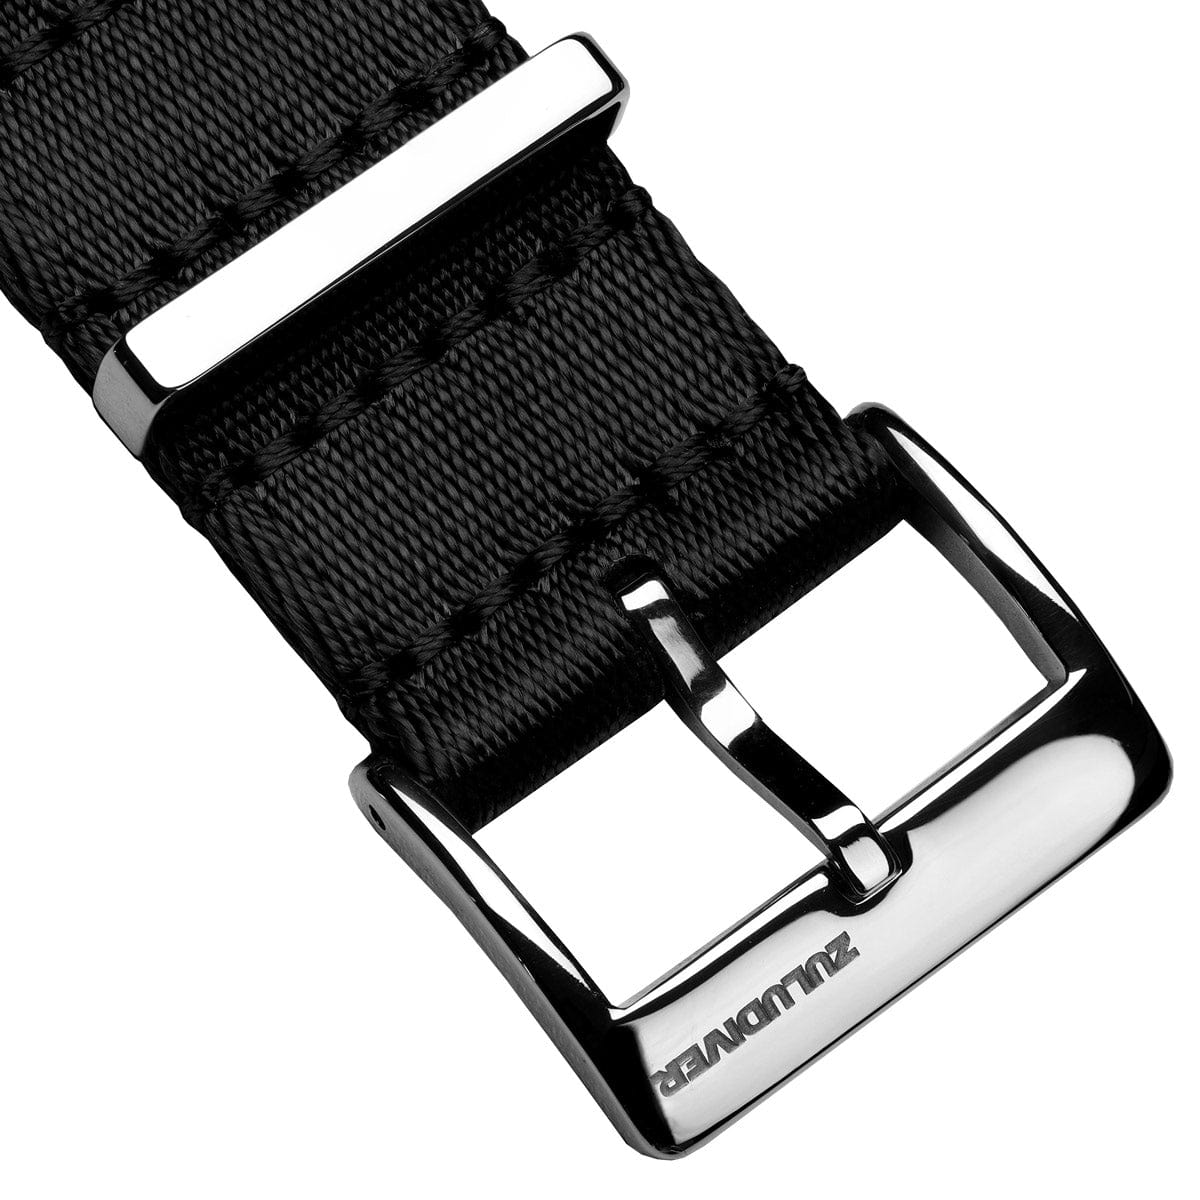 ZULUDIVER British Military Watch Strap: ARMOURED RECON - Military Black, Polished